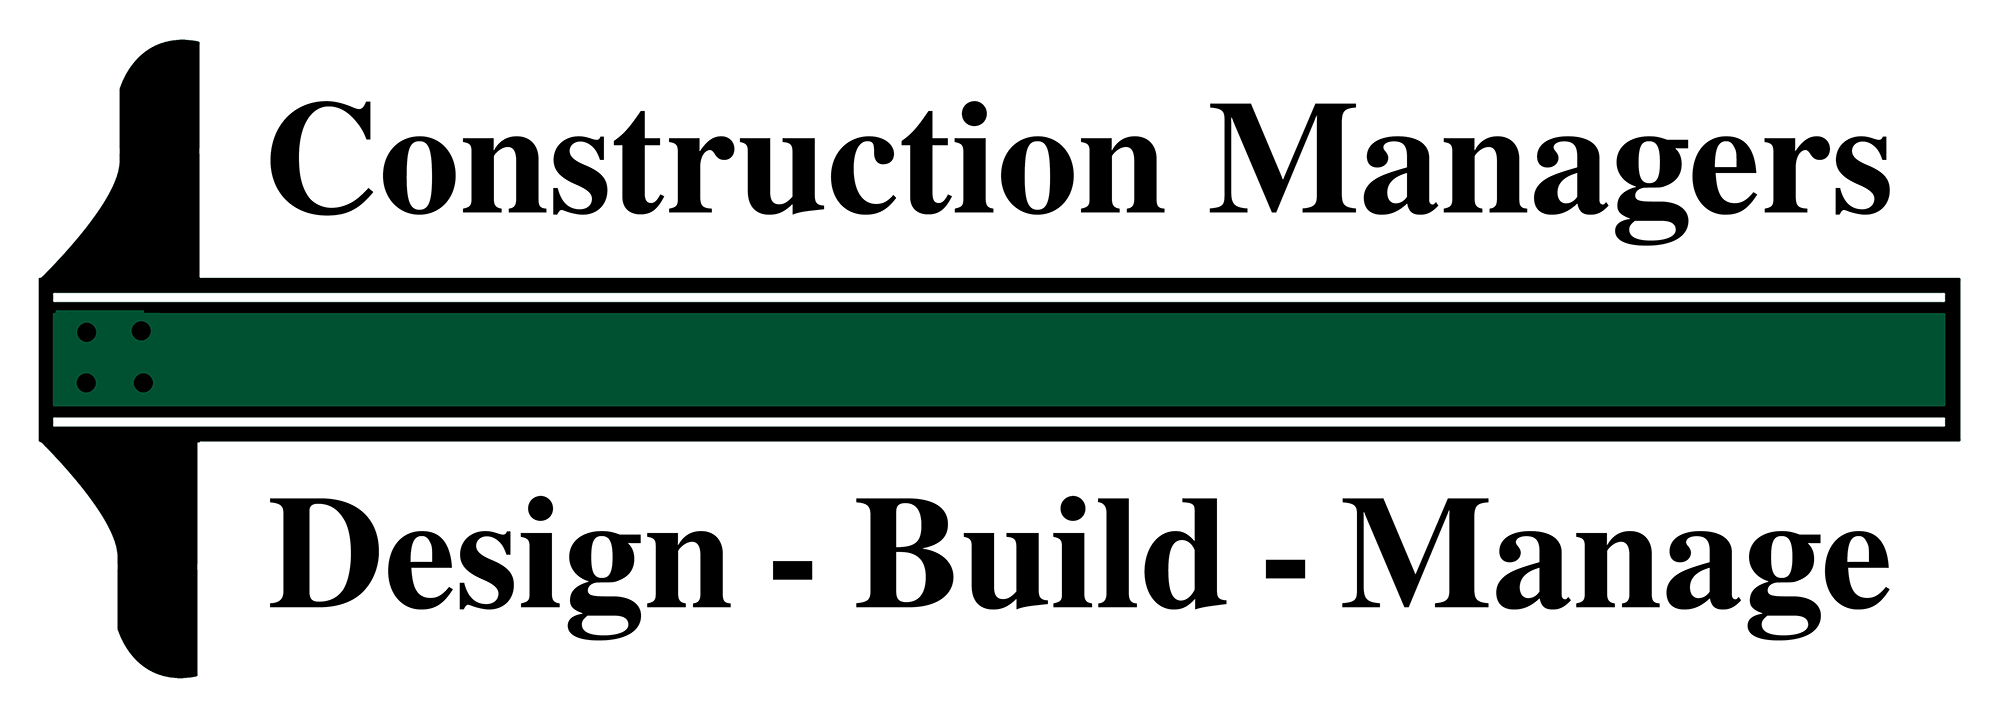 Construction Managers, Inc.